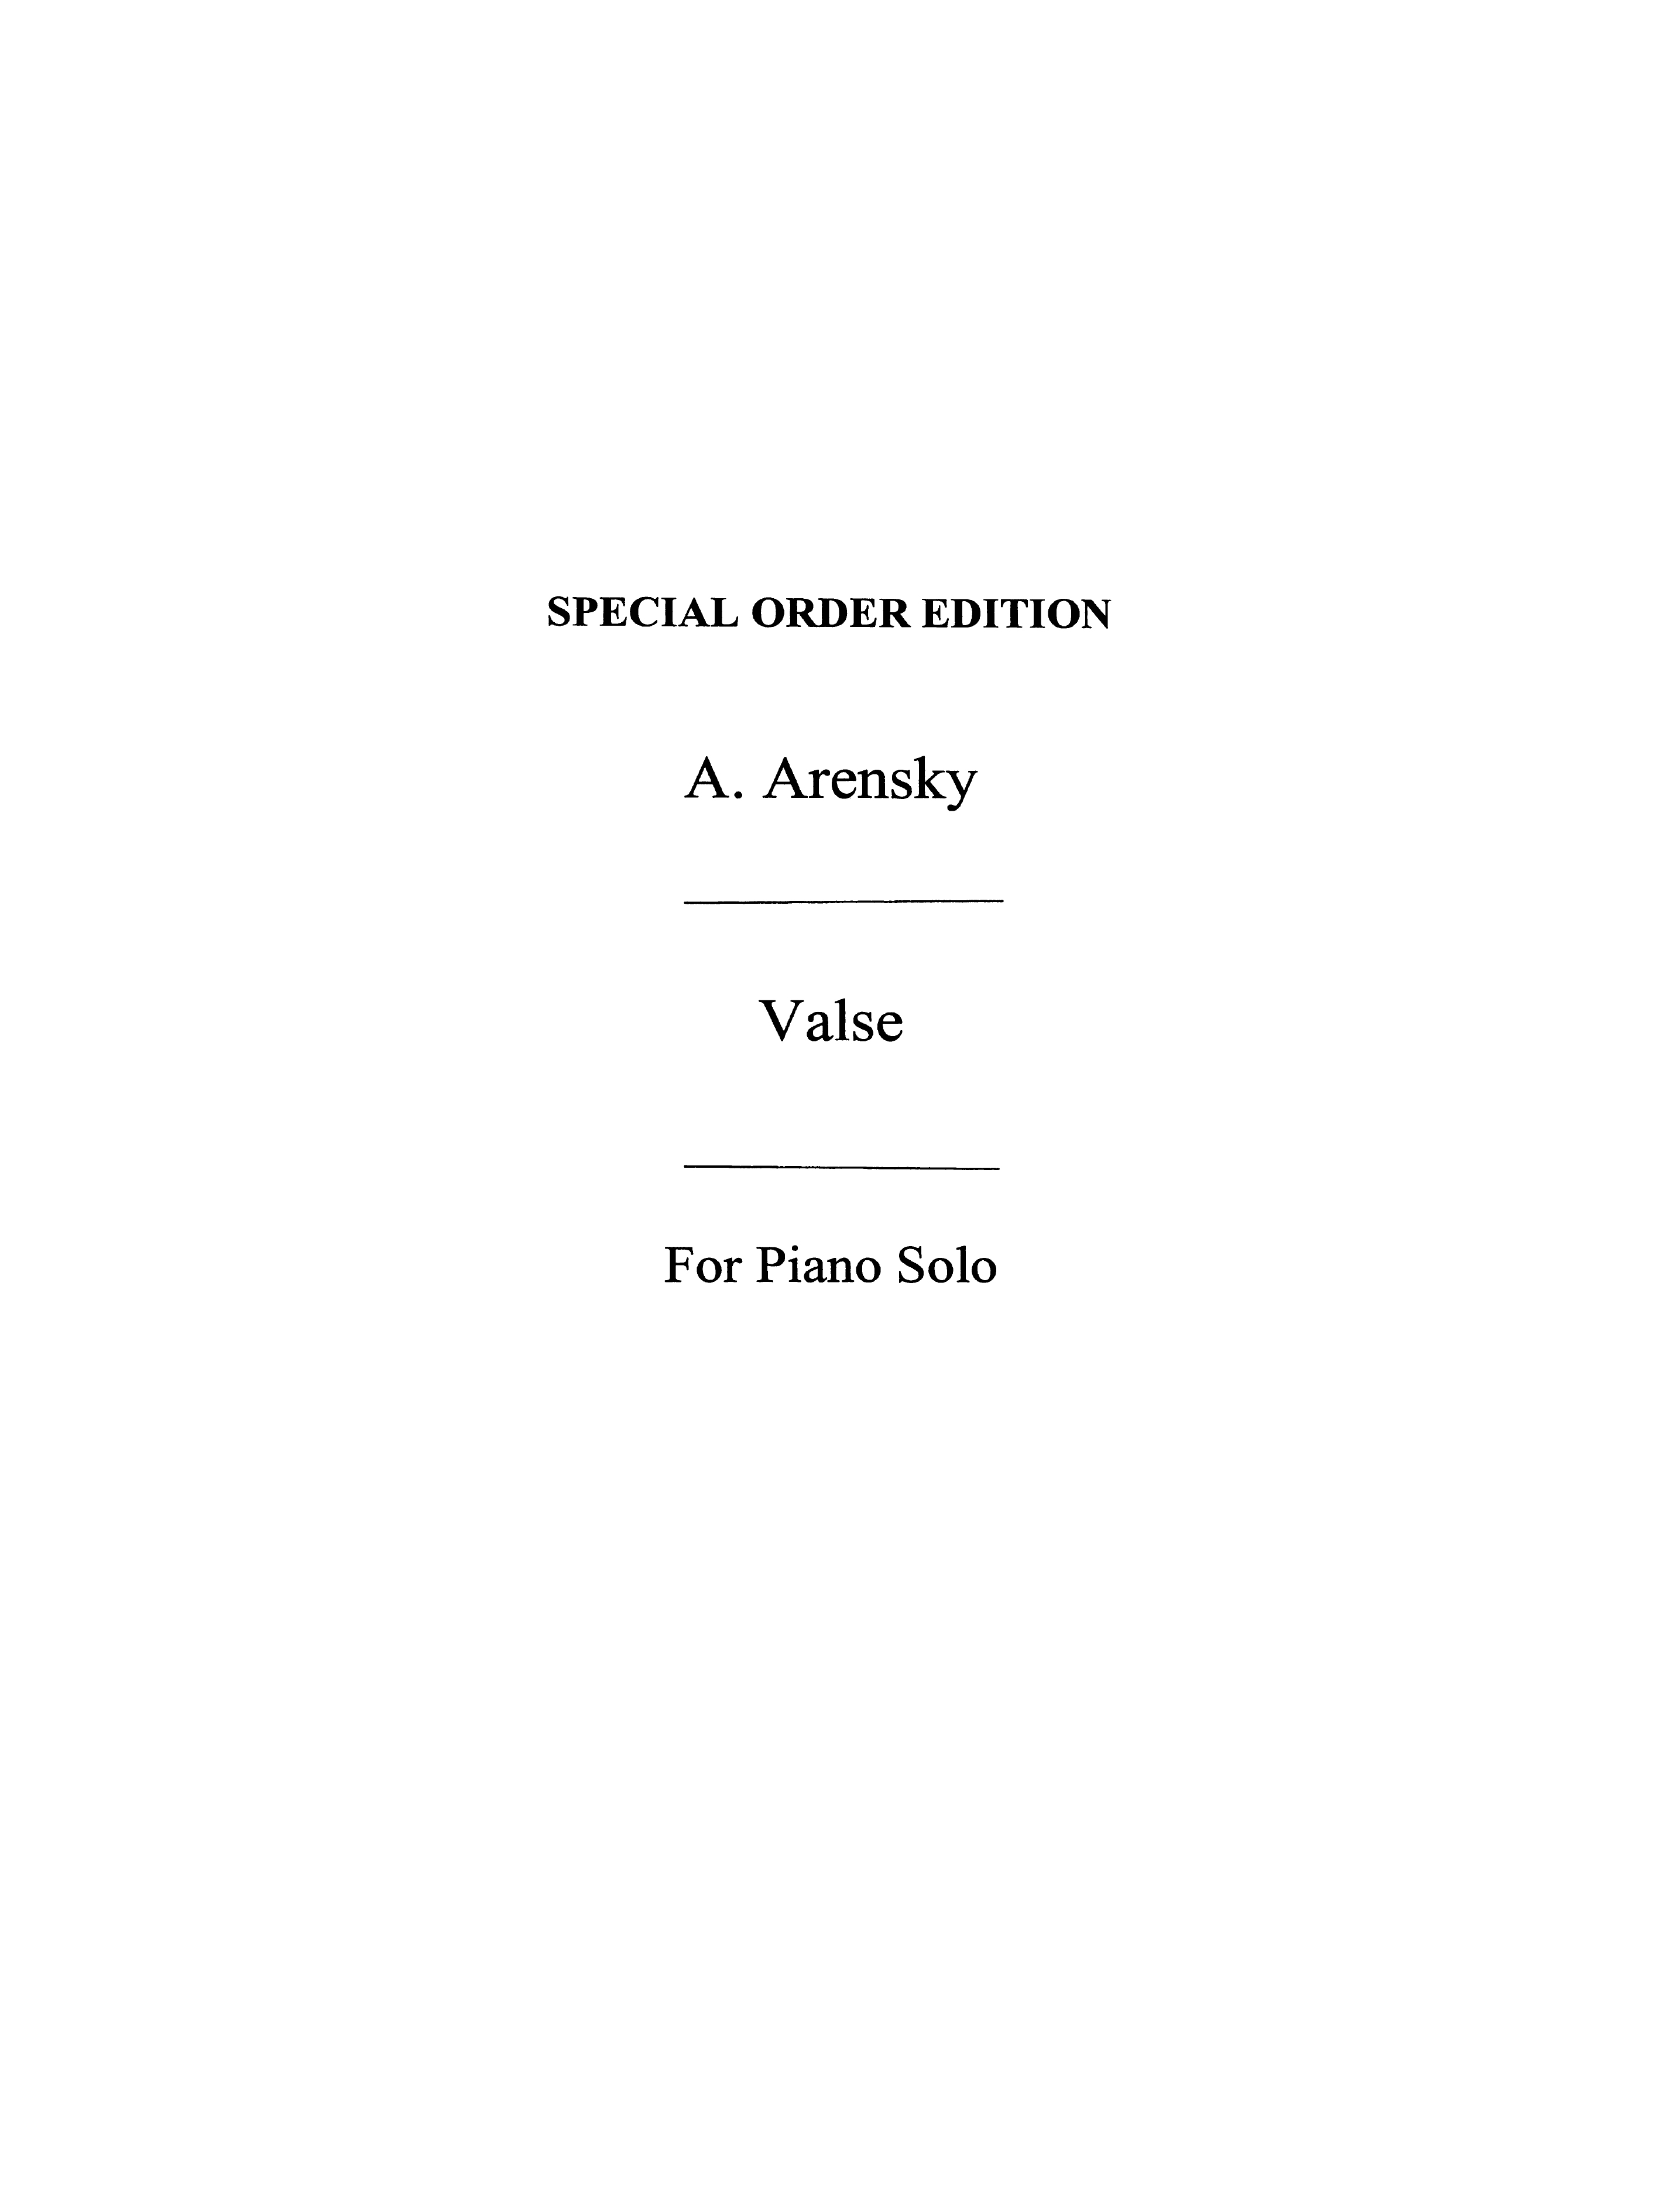 Anton Arensky: Valse From Suite Op.15 (Piano Solo)